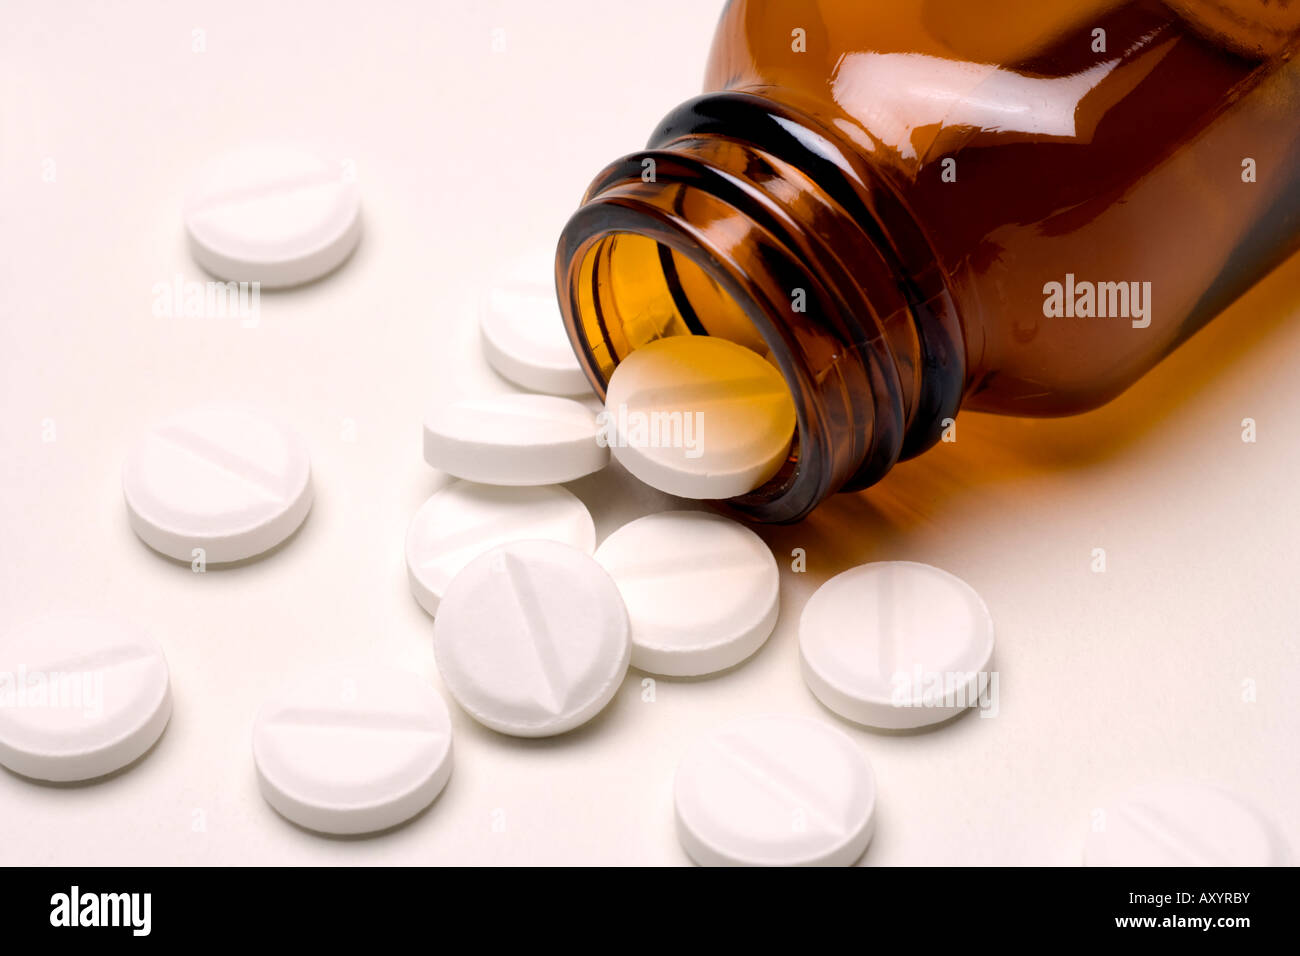 Pills drugs or tablets spilling out of a brown glass medicine bottle  aspirin or paracetamol Stock Photo - Alamy